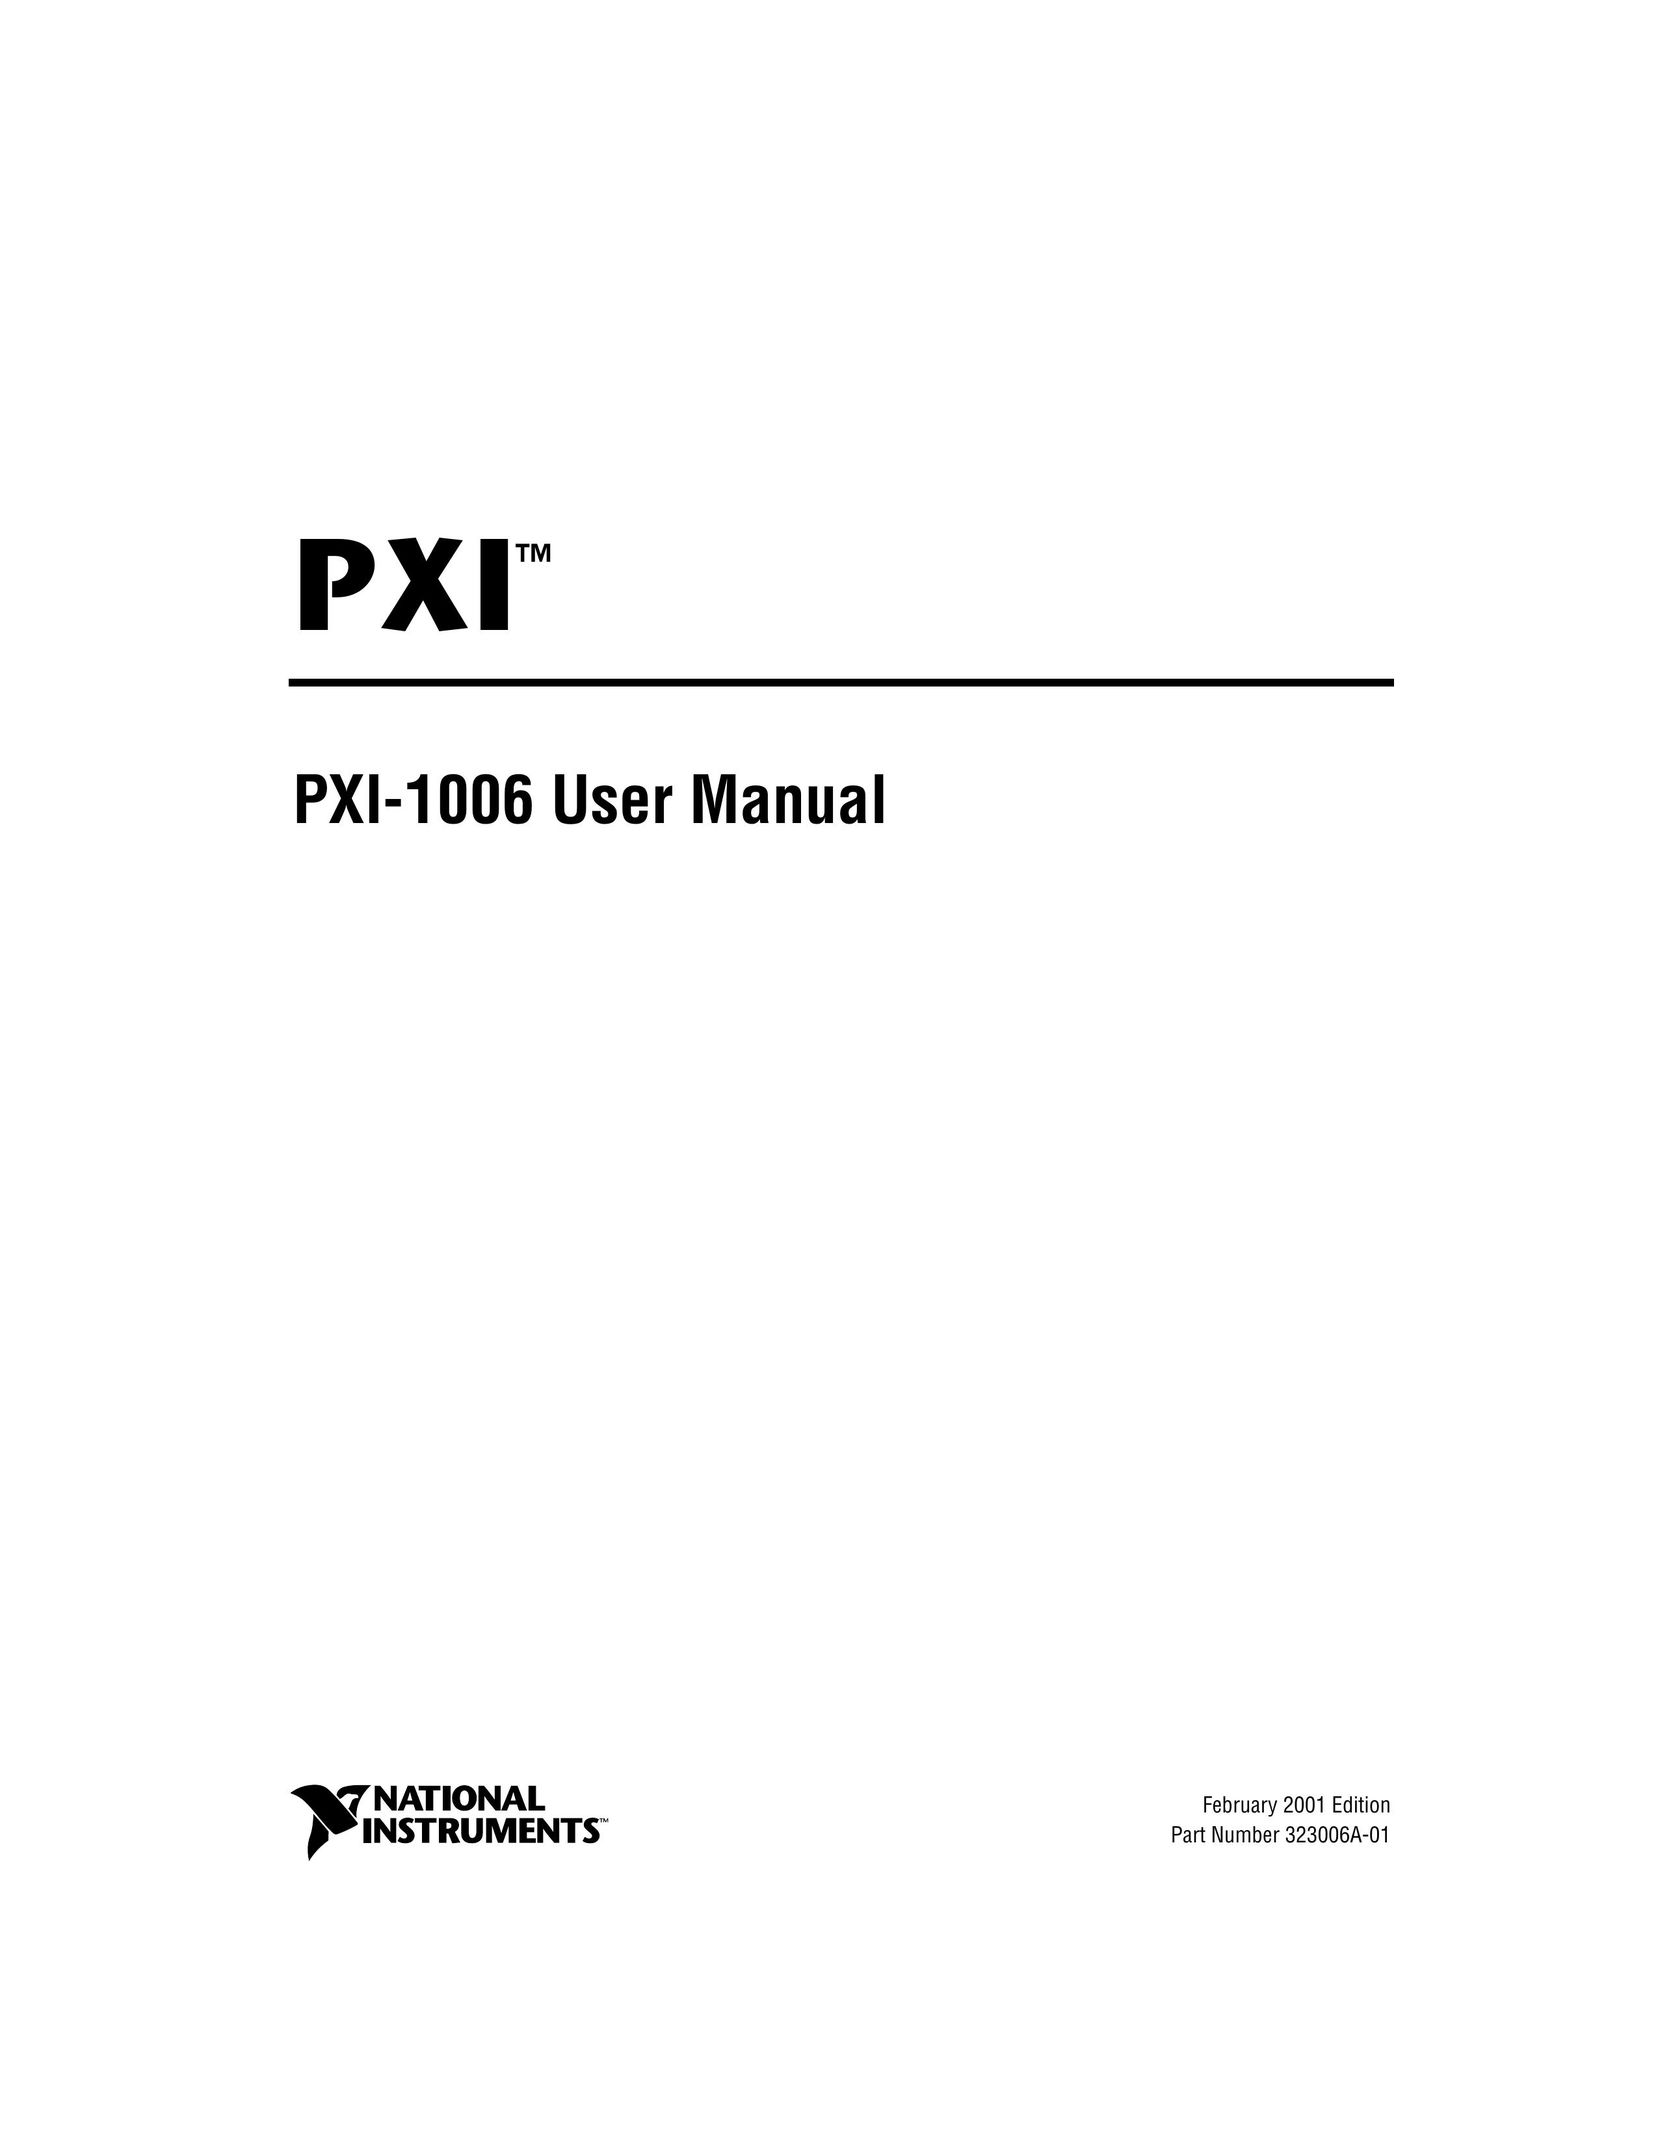 National Instruments PXI-1006 User Manual Home Theater Server User Manual